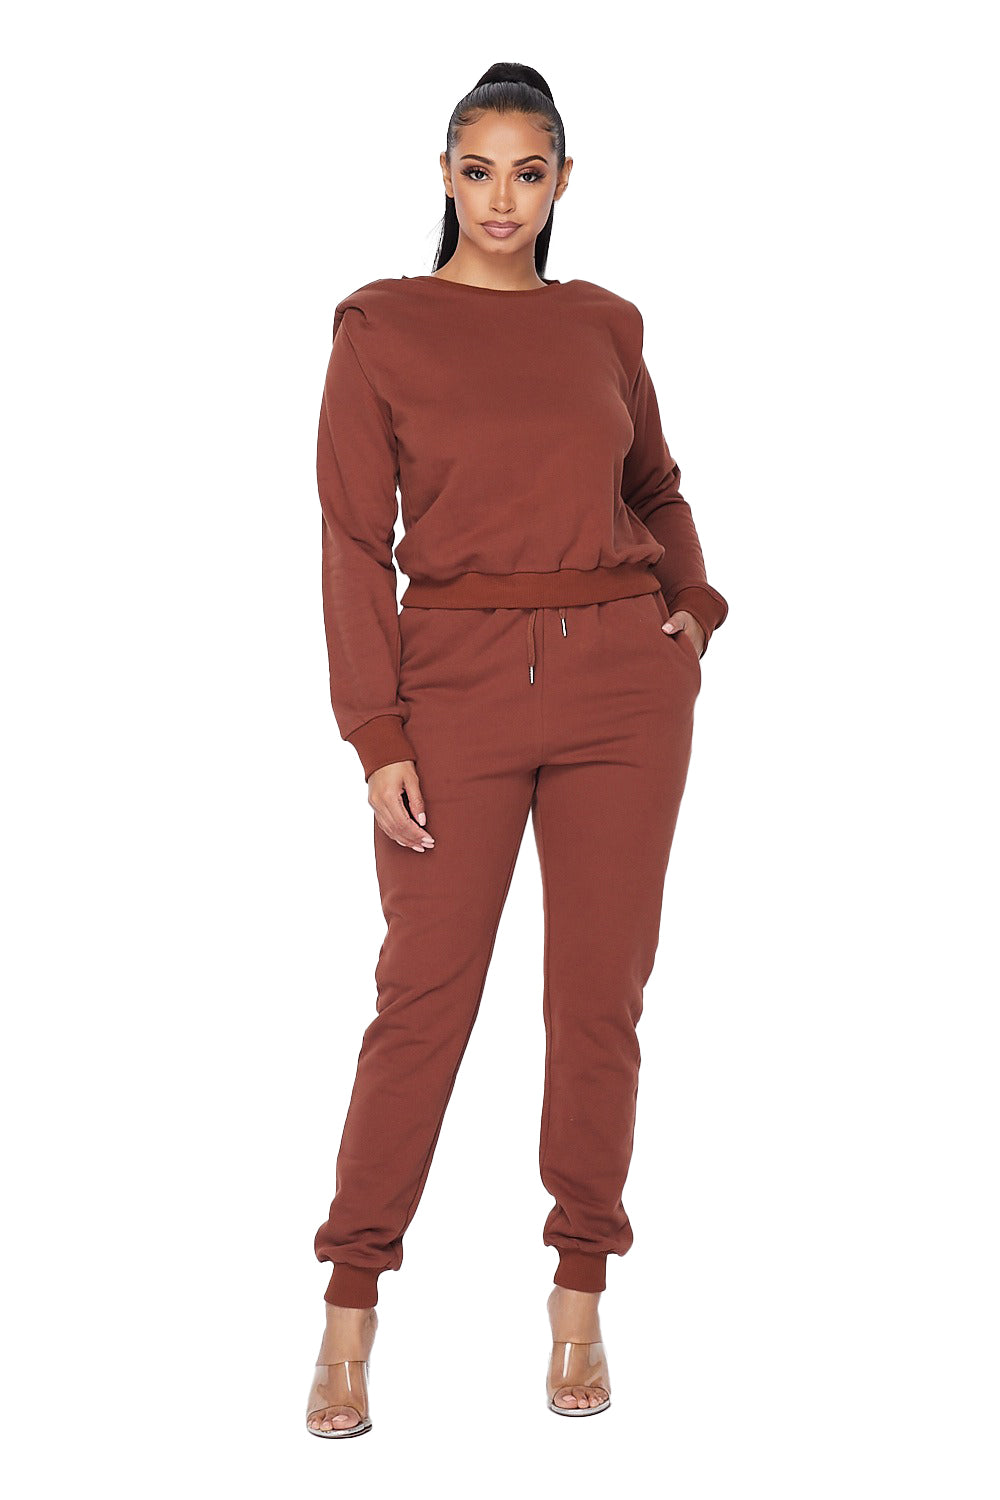 Padded Shoulder Jogging Suit -Chocolate Hot & Delicious